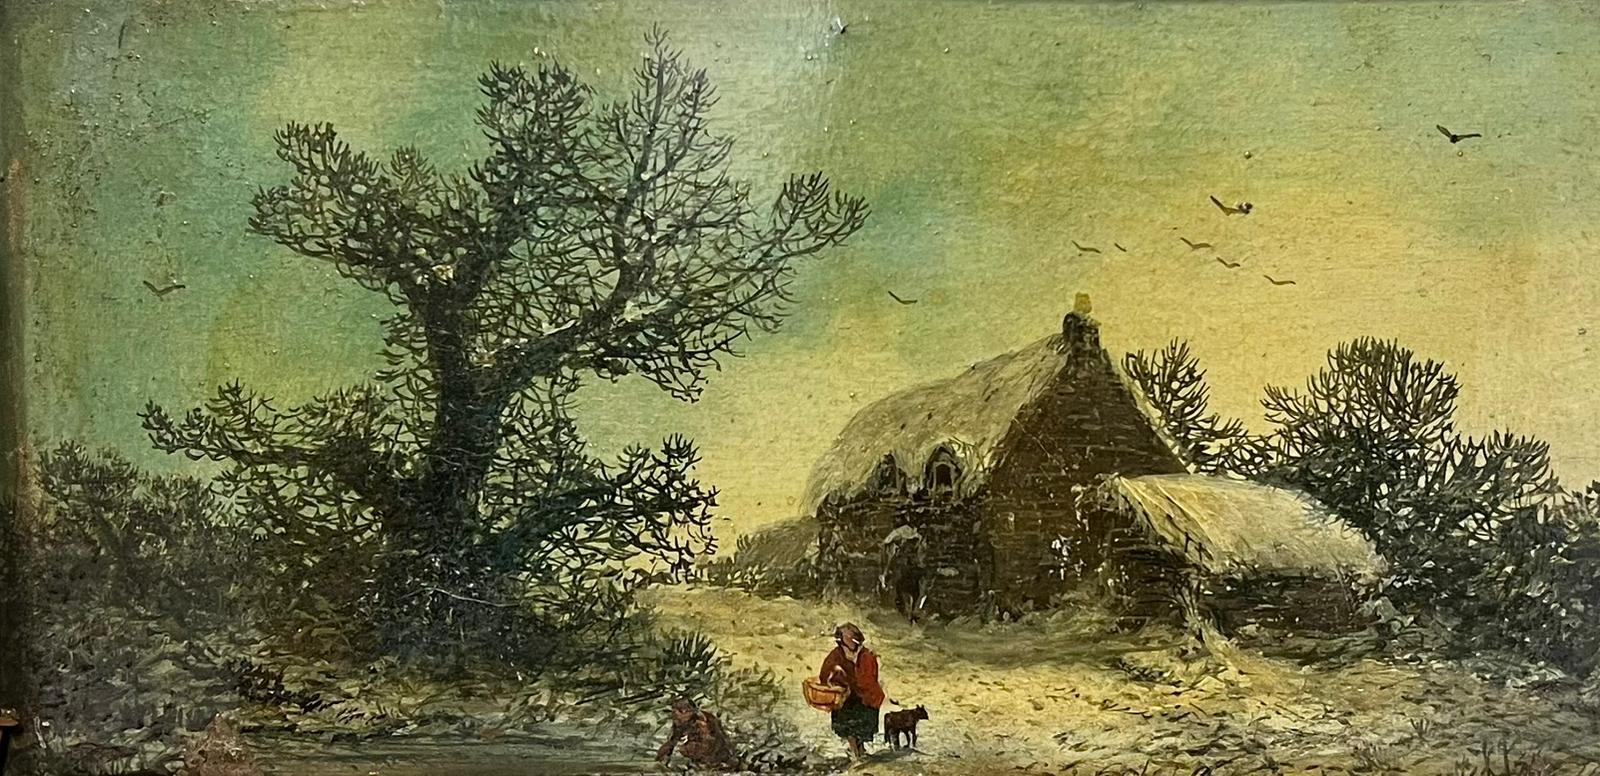 Winter Scene
English School, 19th century
oil on board, framed
framed: 13.5 x 19 inches
board: 6 x 12 inches
provenance: private collection, England
condition: good and sound condition, a few minor scuffs and 'knocks'.
